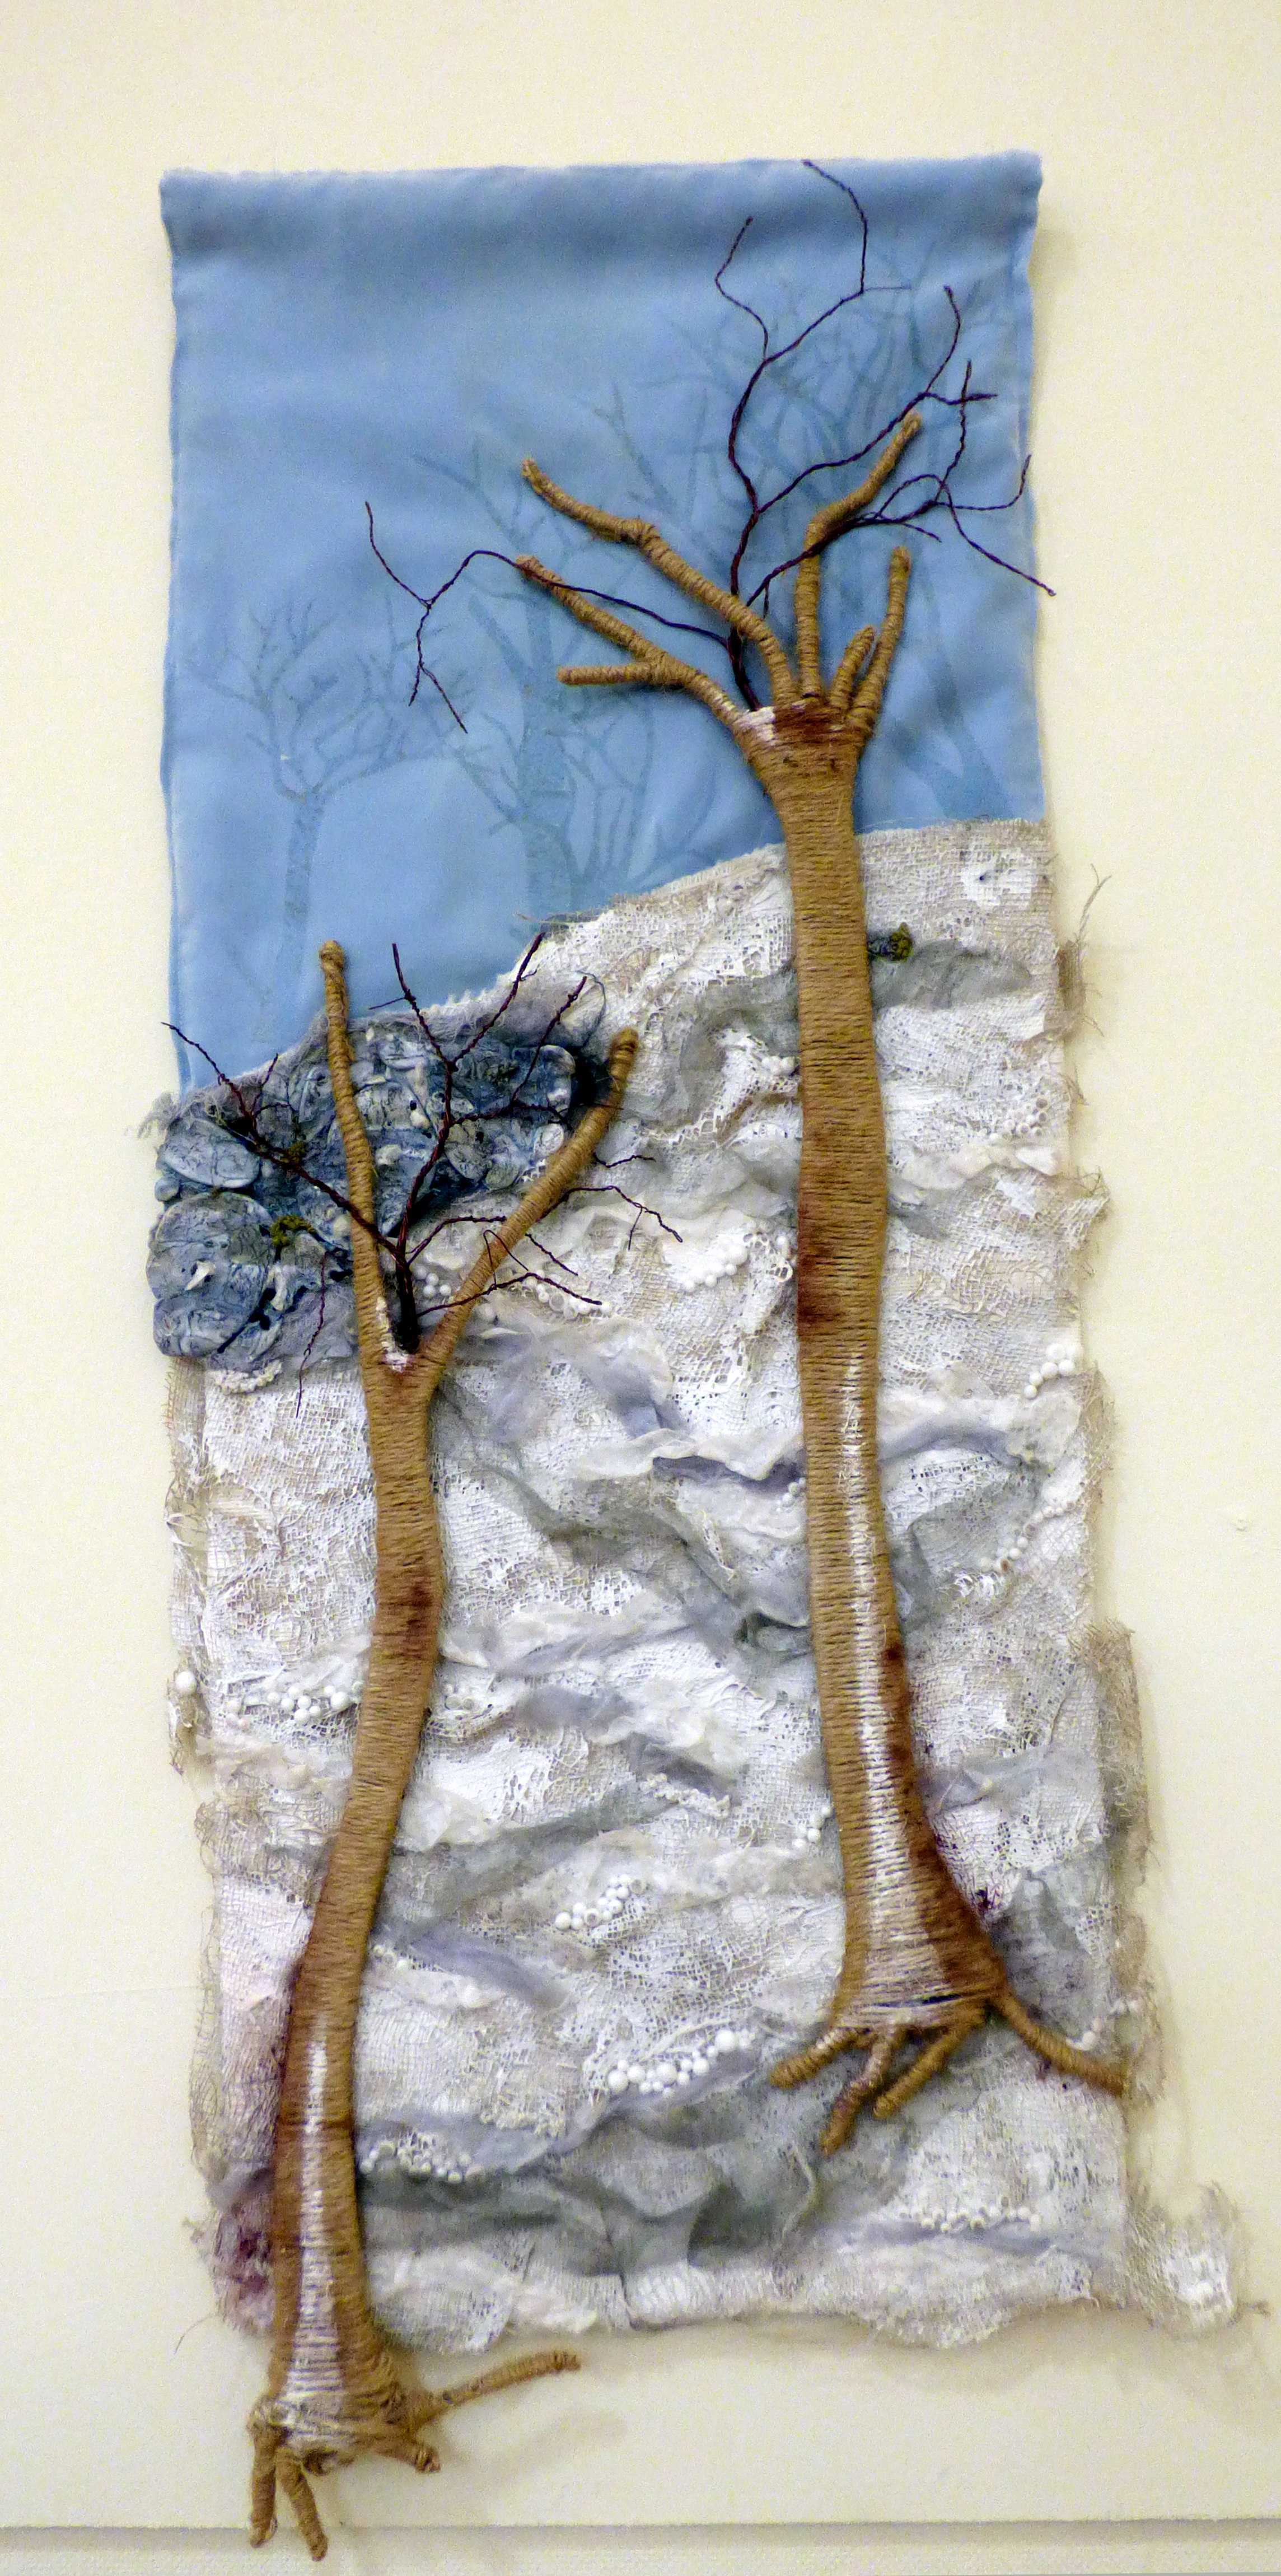 TREES IN A DERBYSHIRE LANDSCAPE by Judi Brown, Glossop & District EG, mixed media with woven silver, wire, gesso and Tyvek